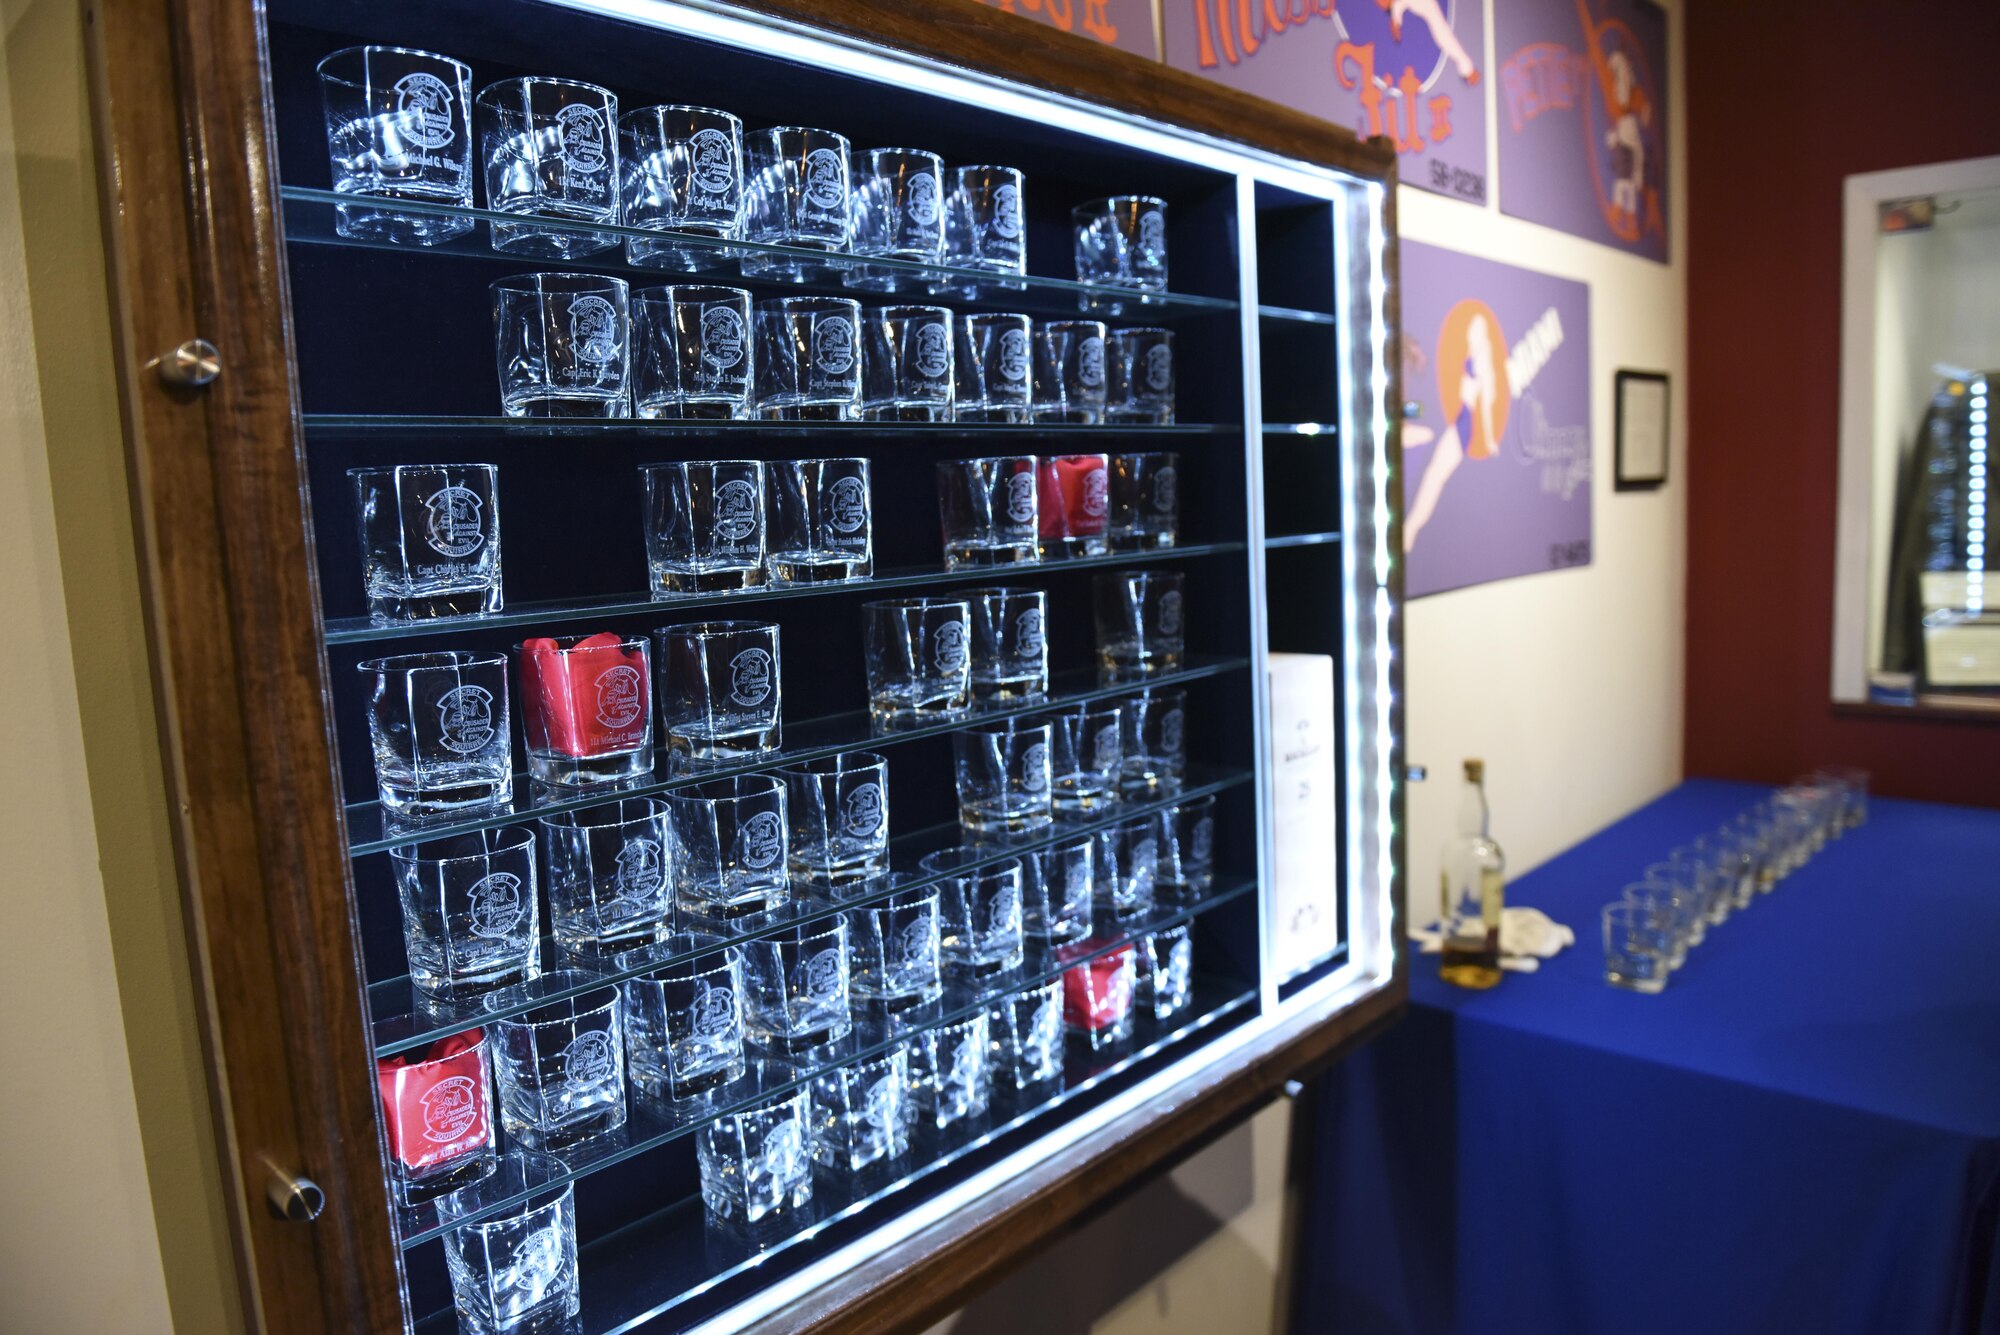 Glasses, engraved with the names of each Operation Secret Squirrel crewmember, sit on display at the Barksdale Global Power museum on Barksdale Air Force Base, La., Jan. 17, 2017. Jan. 16, 1991, seven B-52G Stratofortresses from Barksdale took off heading toward Iraqi targets, launched 35 conventional air launch cruise missiles, and returned in secret in support of Operation Desert Storm. The mission, Operation Senior Surprise, remained classified until Jan. 16. 1992, when the crewmembers who made the mission possible were presented with air, achievement and commendation medals for their efforts. (U.S. Air Force photo/Airman 1st Class Alexis Schultz)